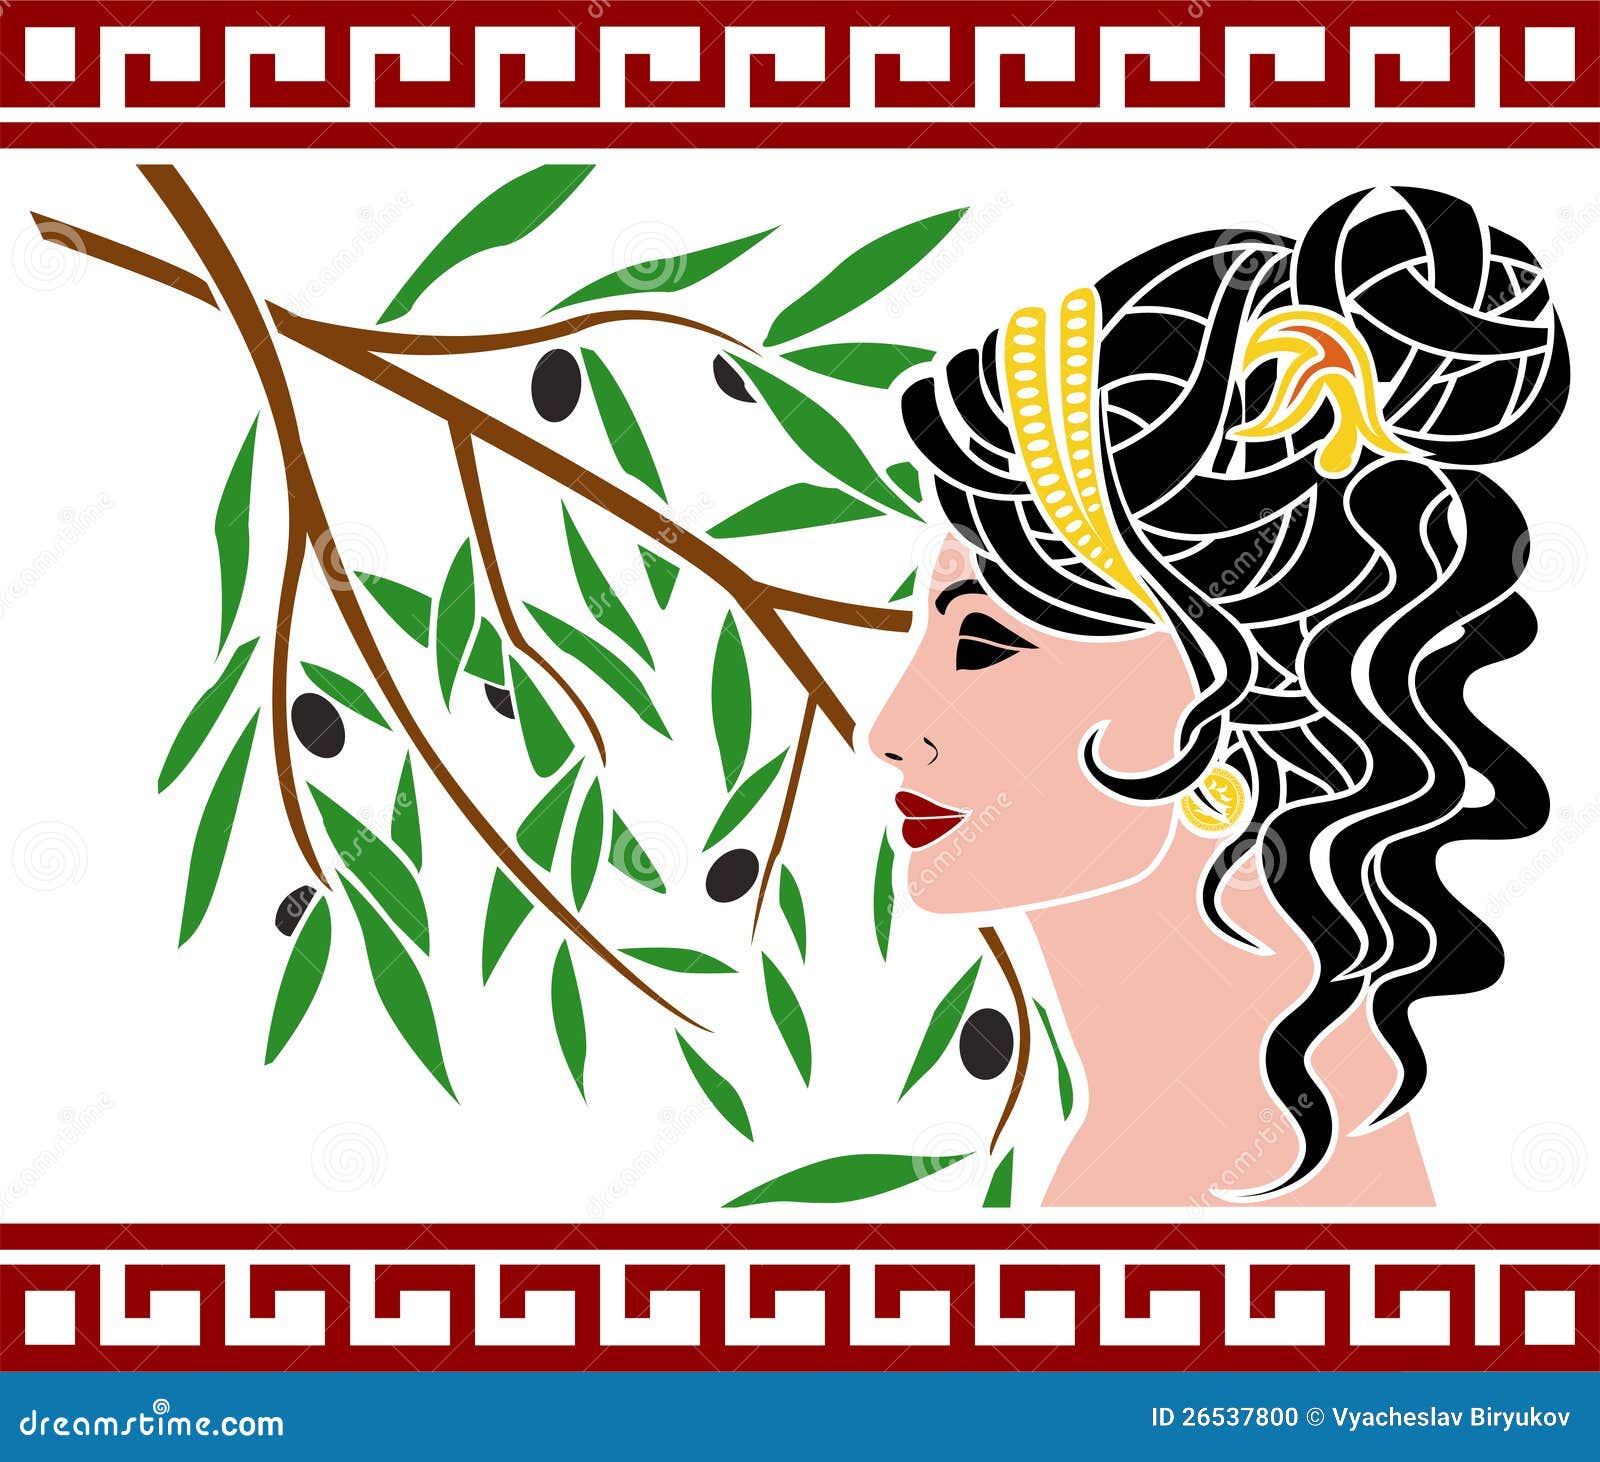 aphrodite and olive branch